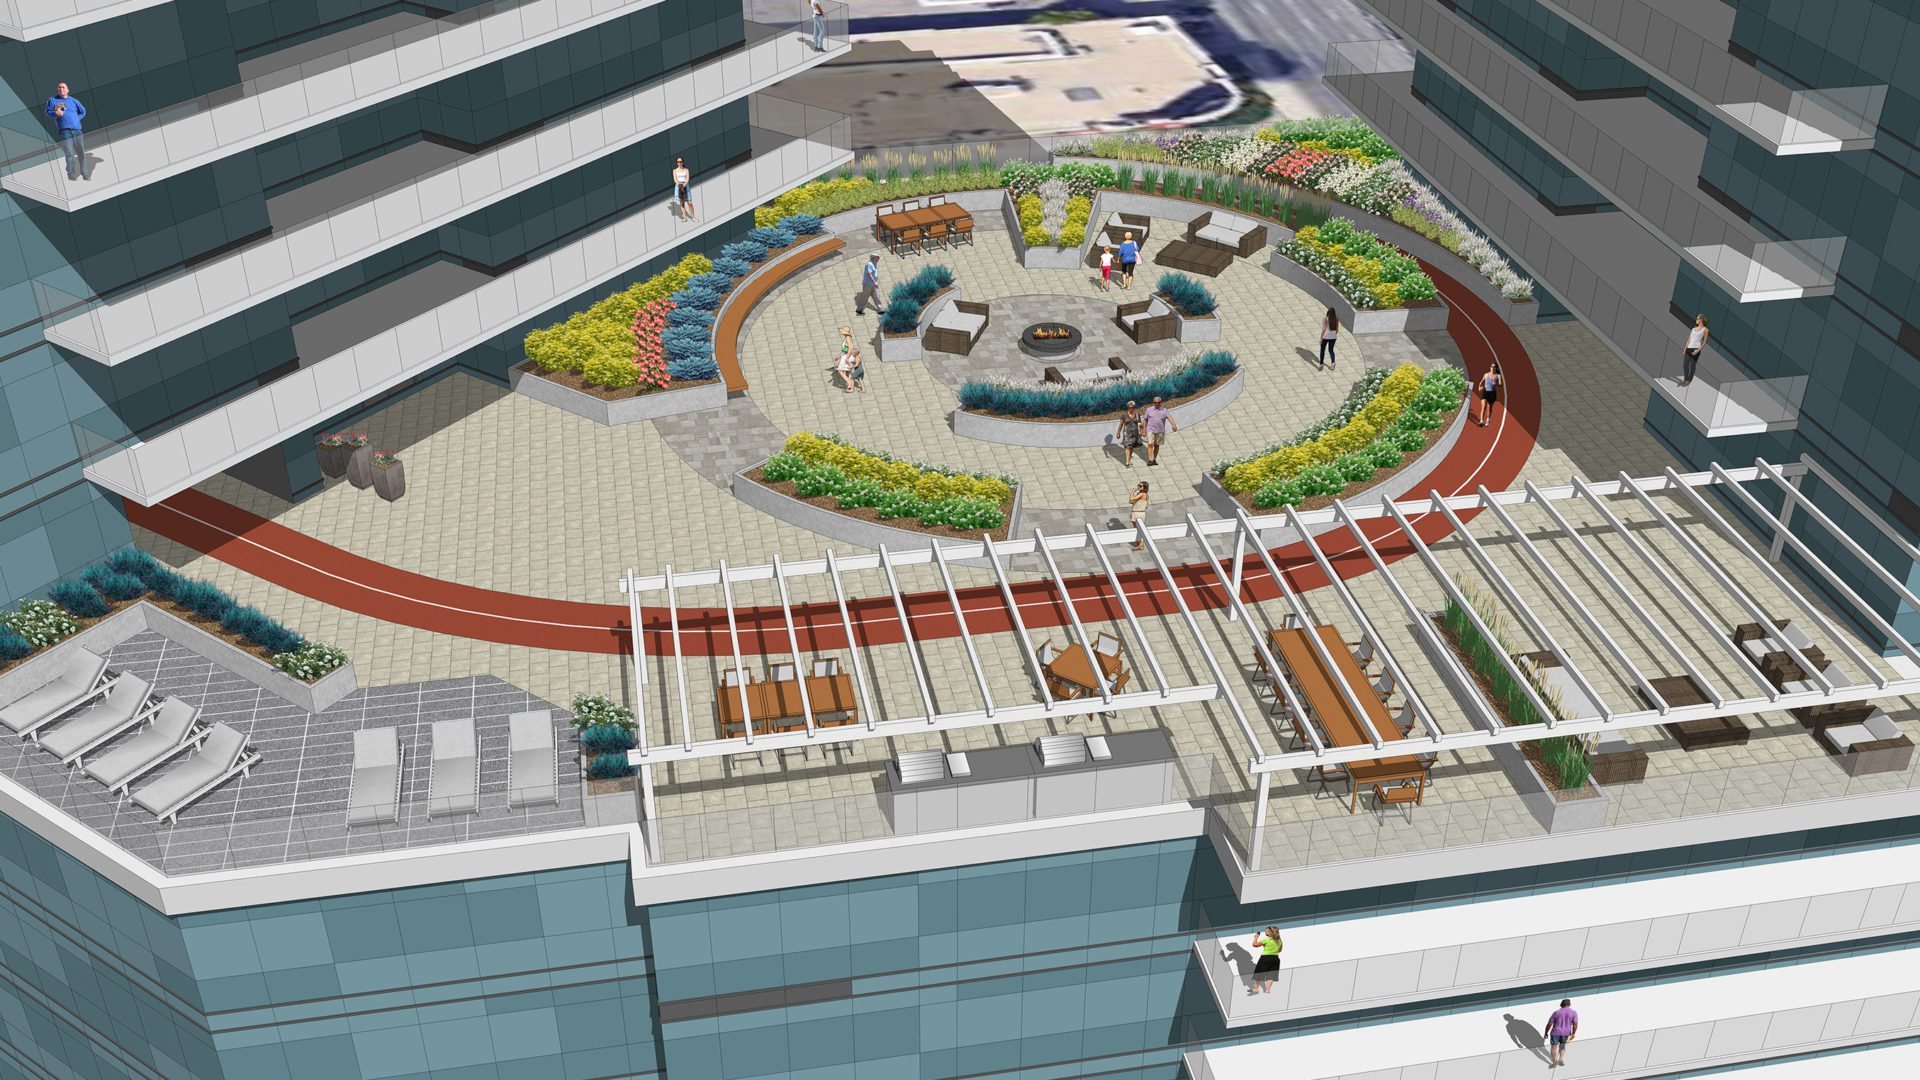 daytime eagle eye view of outdoor common area. there is seating arranged in a circle